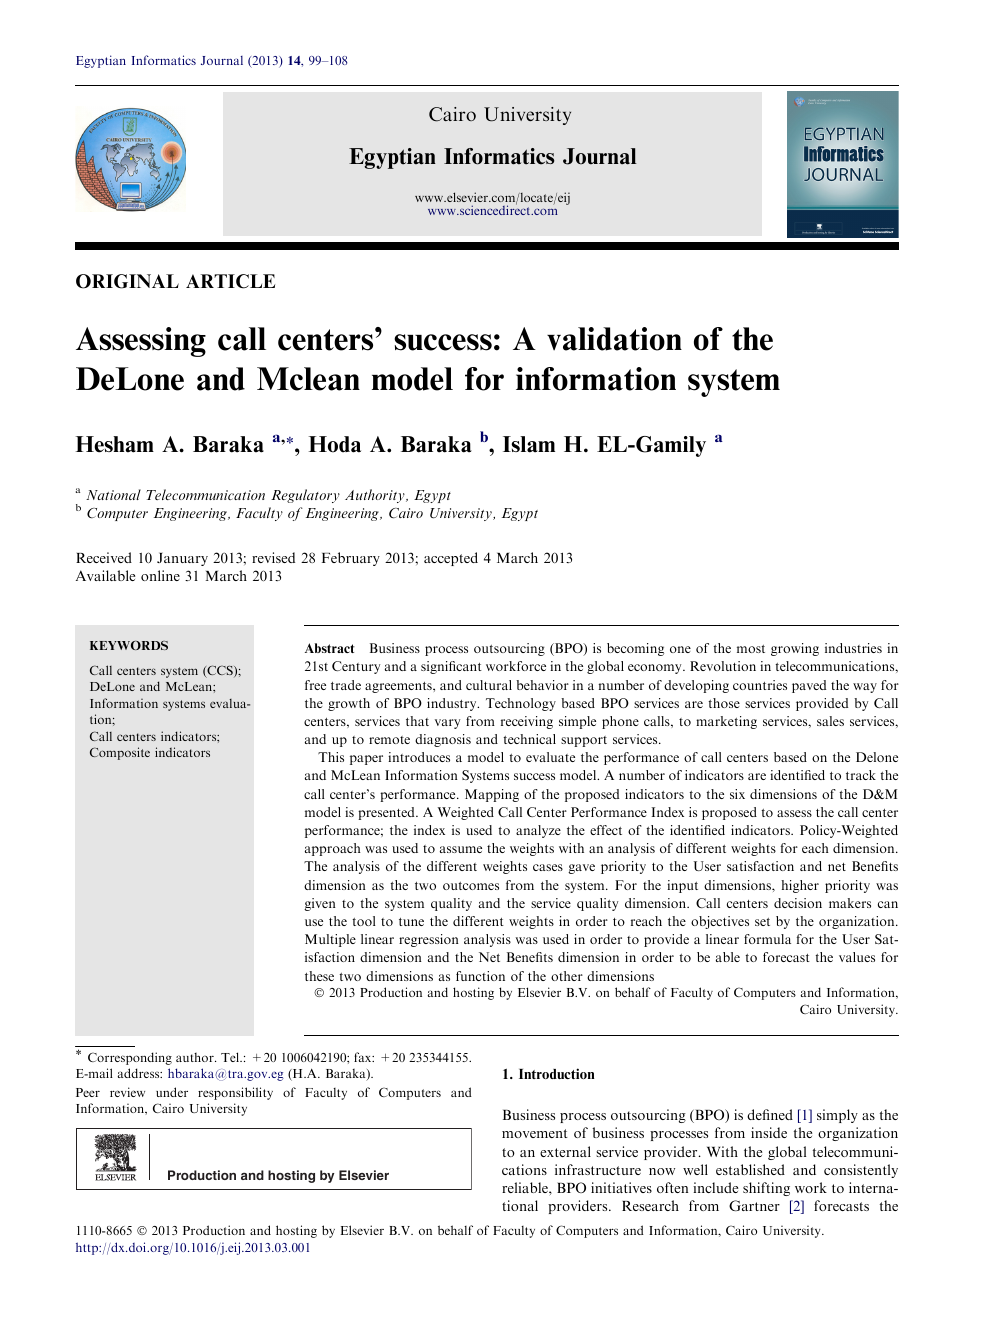 Assessing Call Centers Success A Validation Of The Delone And